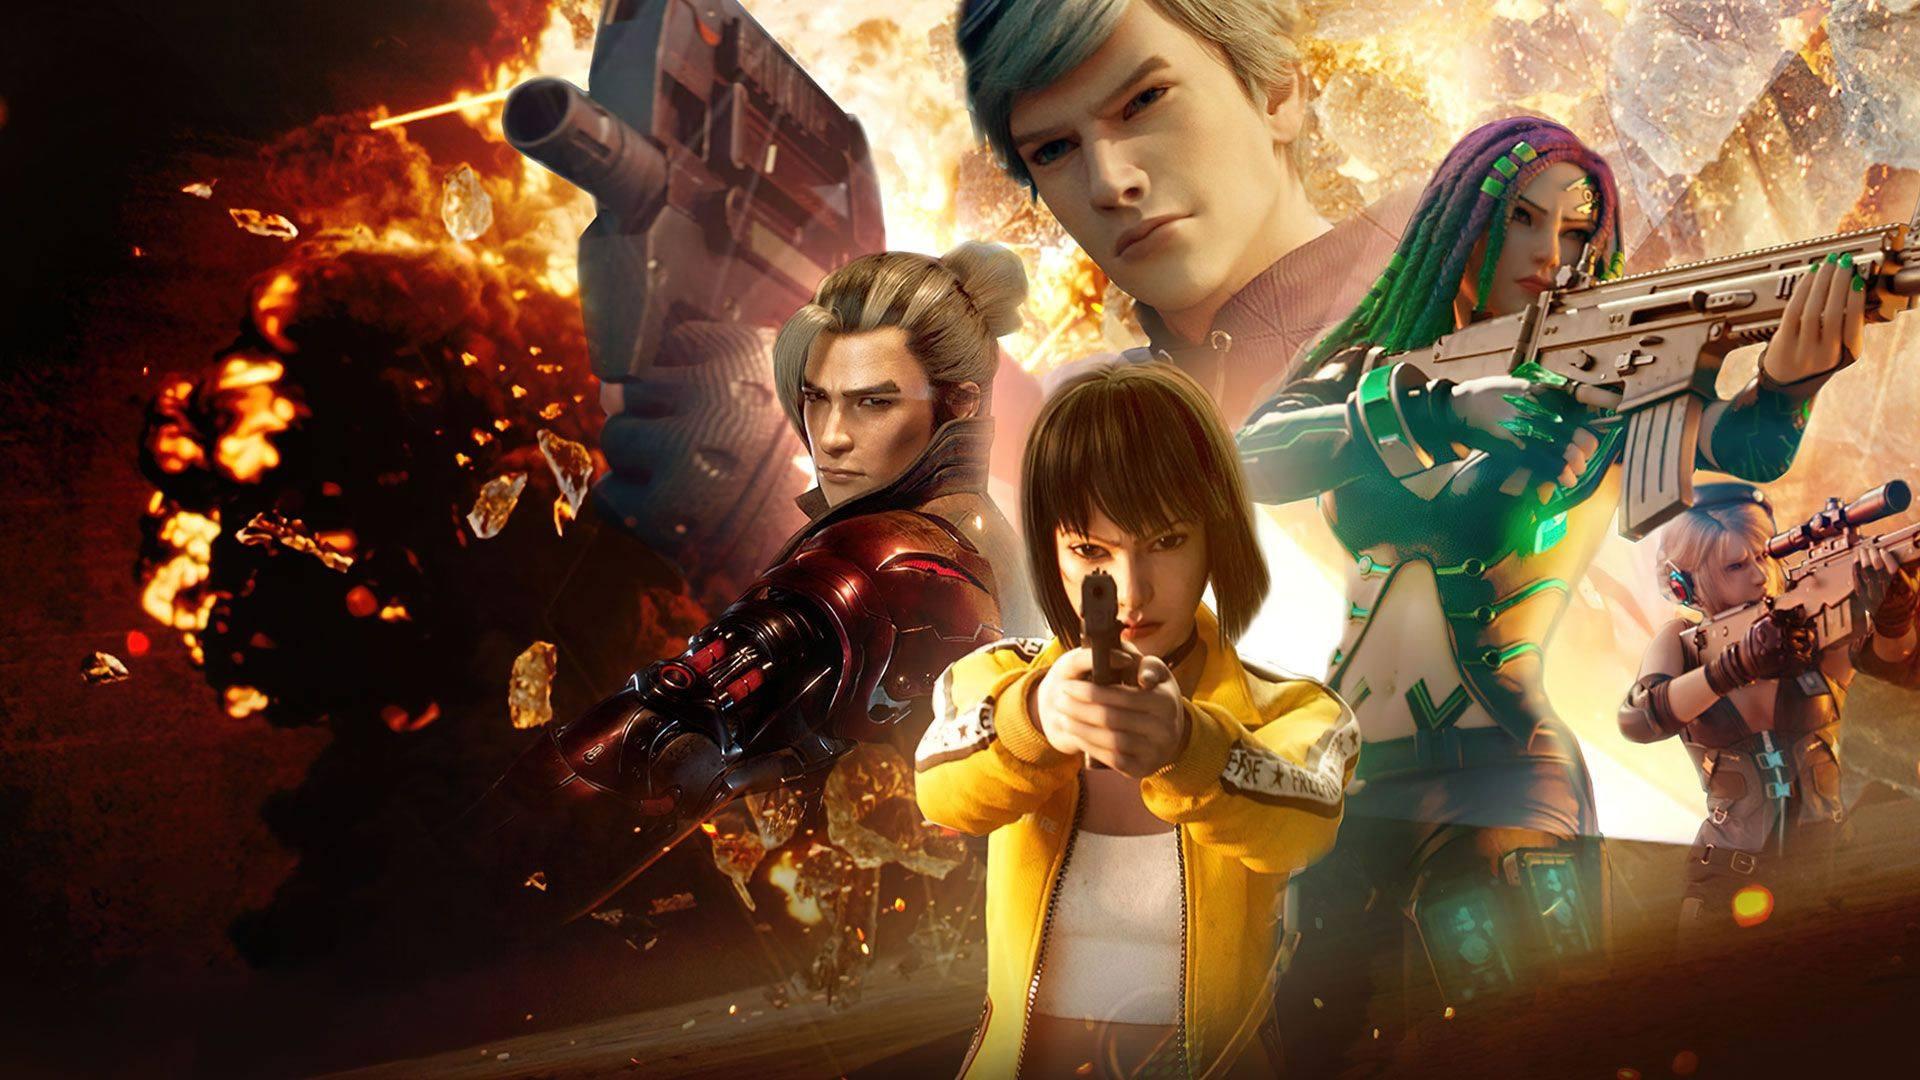 Download & Play Free Fire on PC & Mac in Android 11